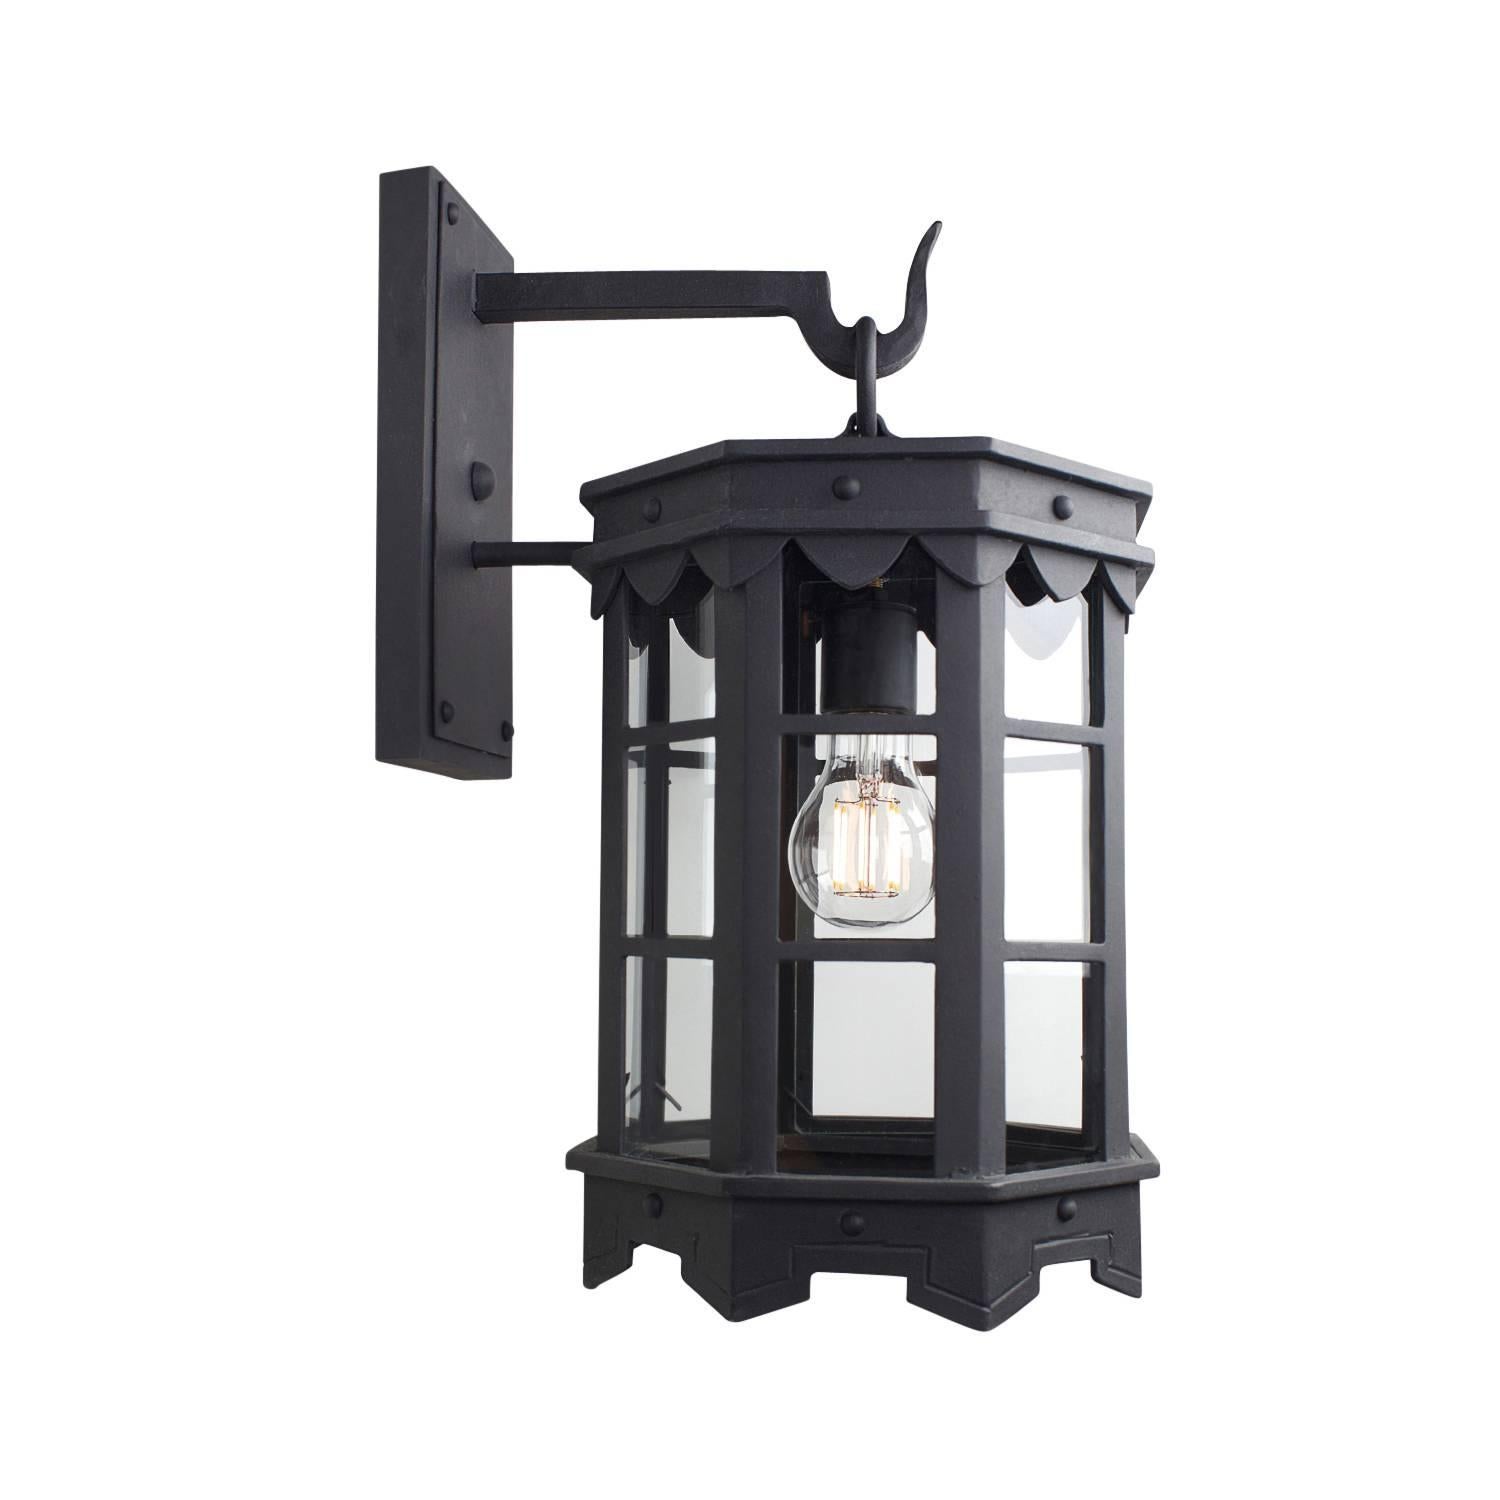 Our De La Guerra 08 lantern finished in our DLG Old World finish has Mediterranean style precedence with historic profiles and contemporized geometric lines. A striking fixture during the day but even more so at night when the patterned hem casts